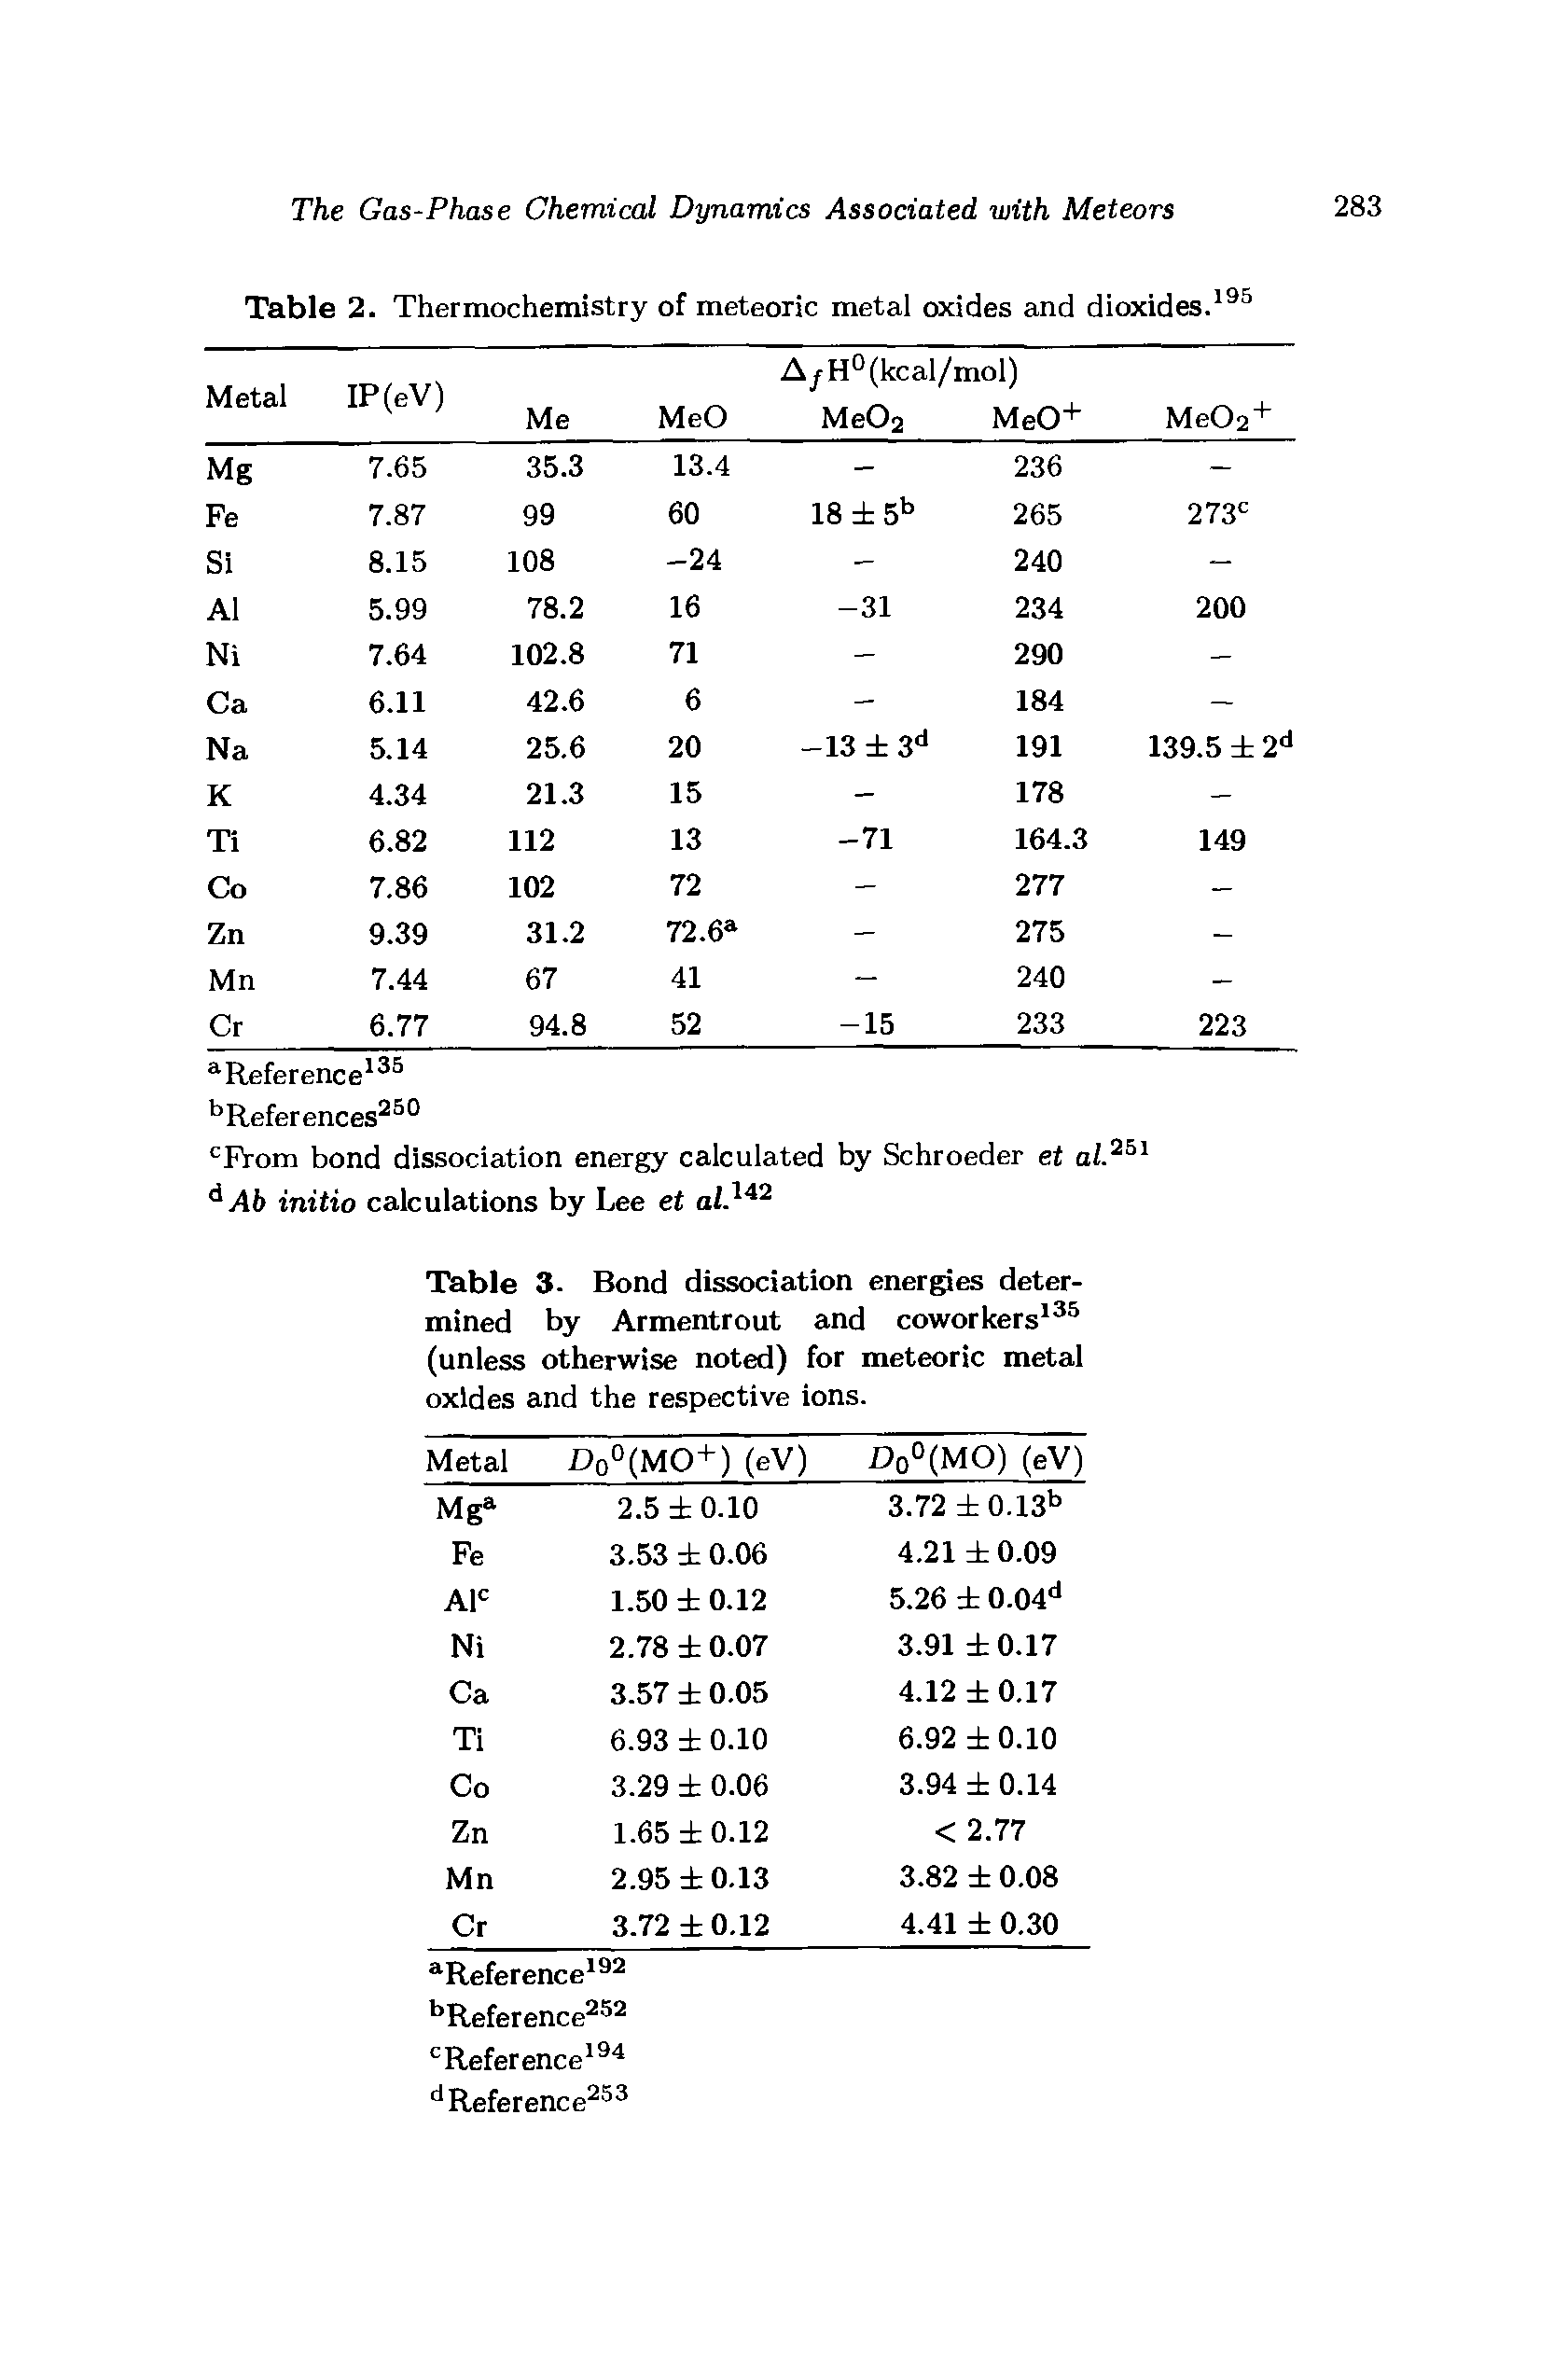 Table 3- Bond dissociation energies determined by Armentrout and coworkers (unless otherwise noted) for meteoric metal oxides and the respective ions.